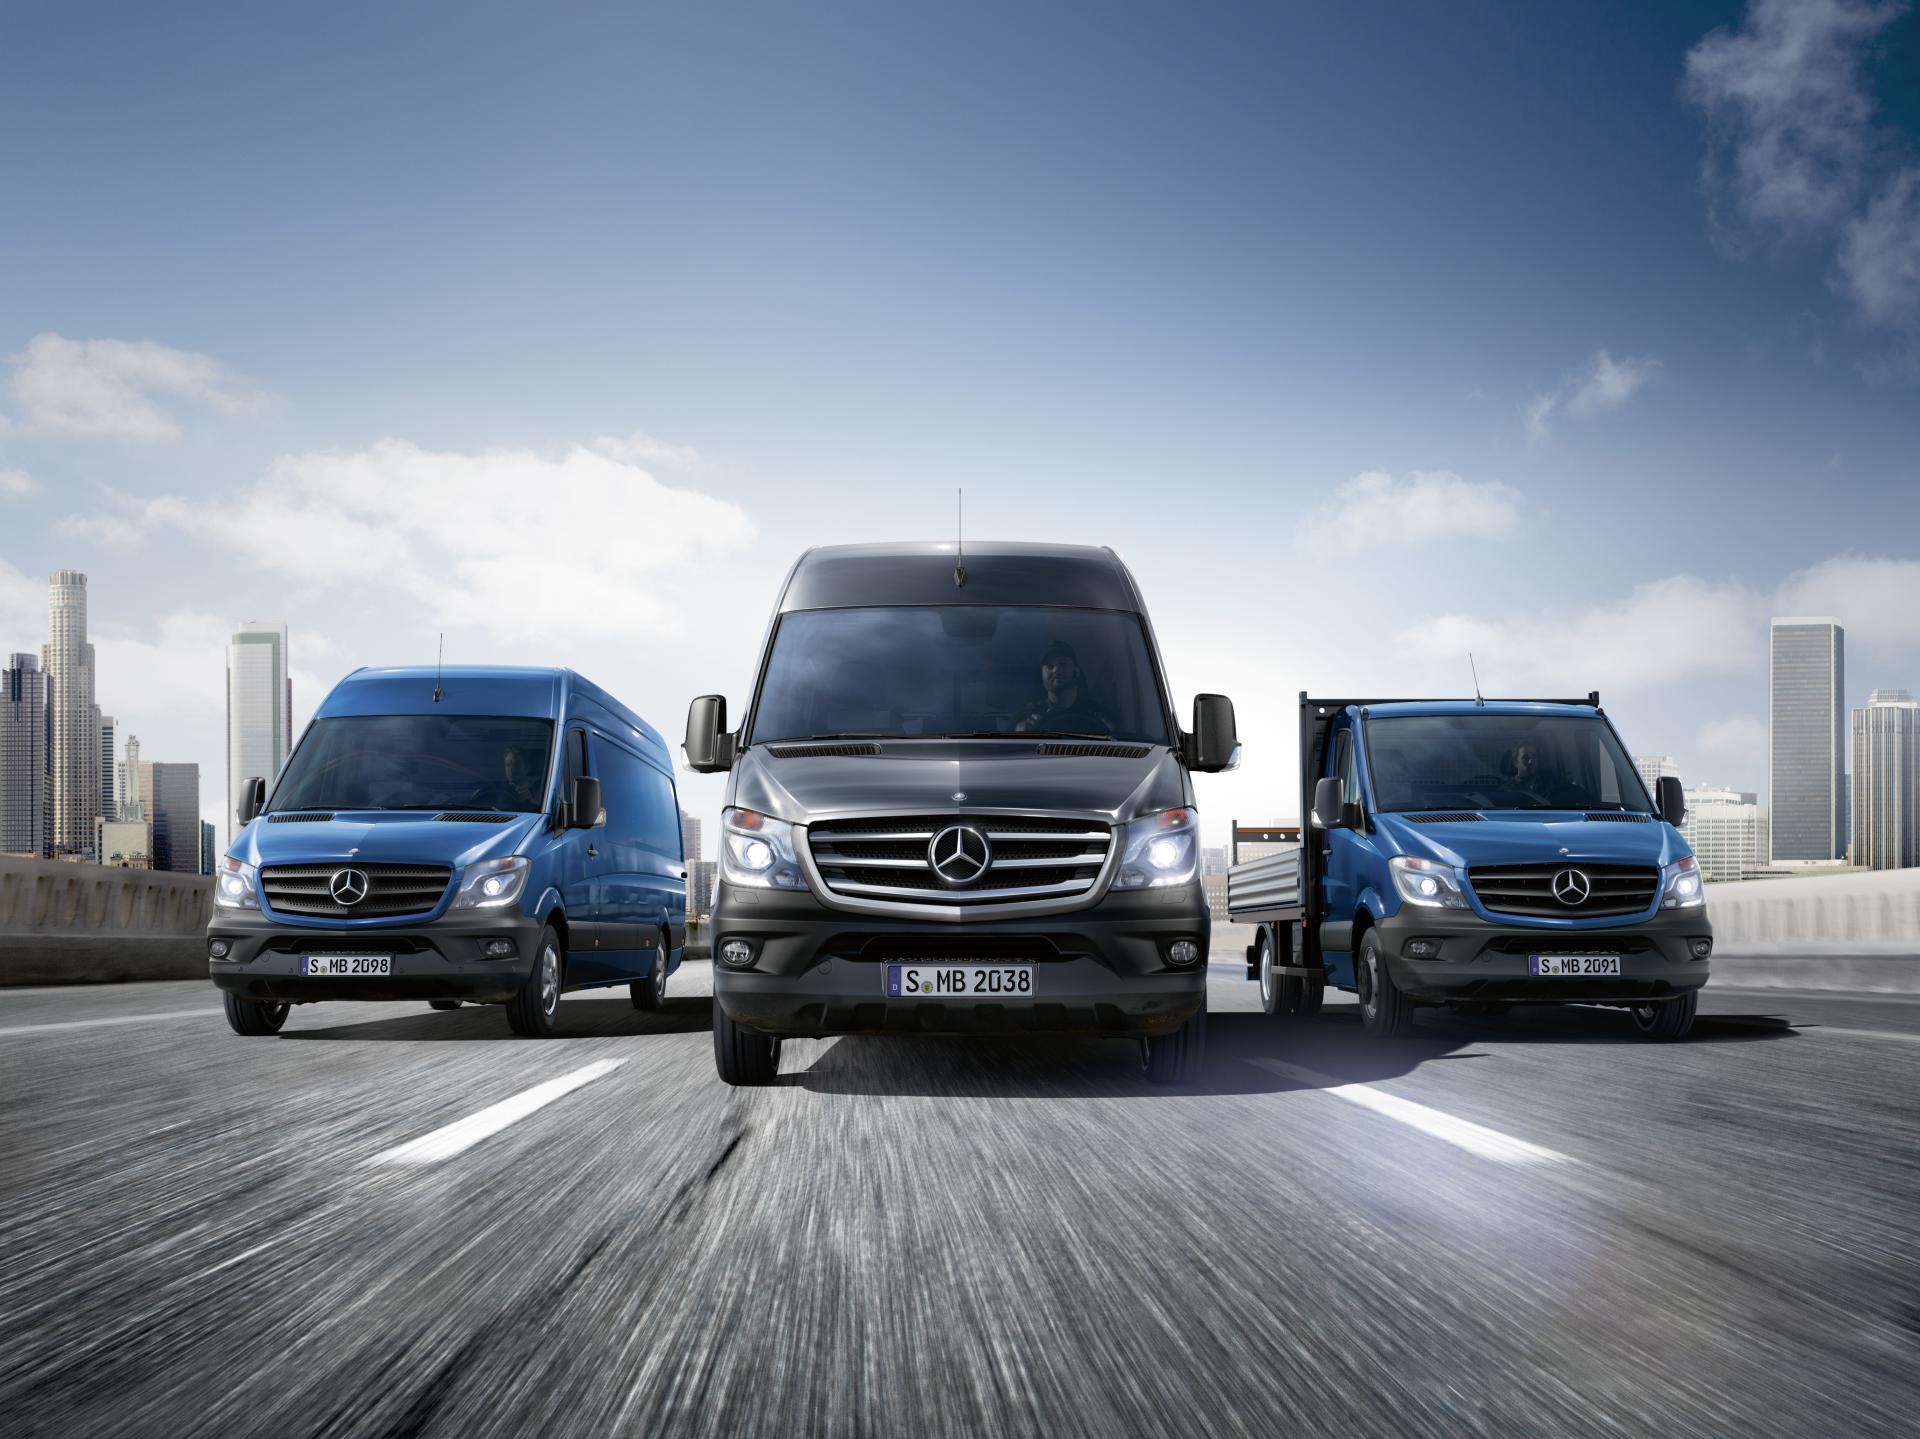 Mercedes Benz Sprinter Wallpaper And Image Gallery